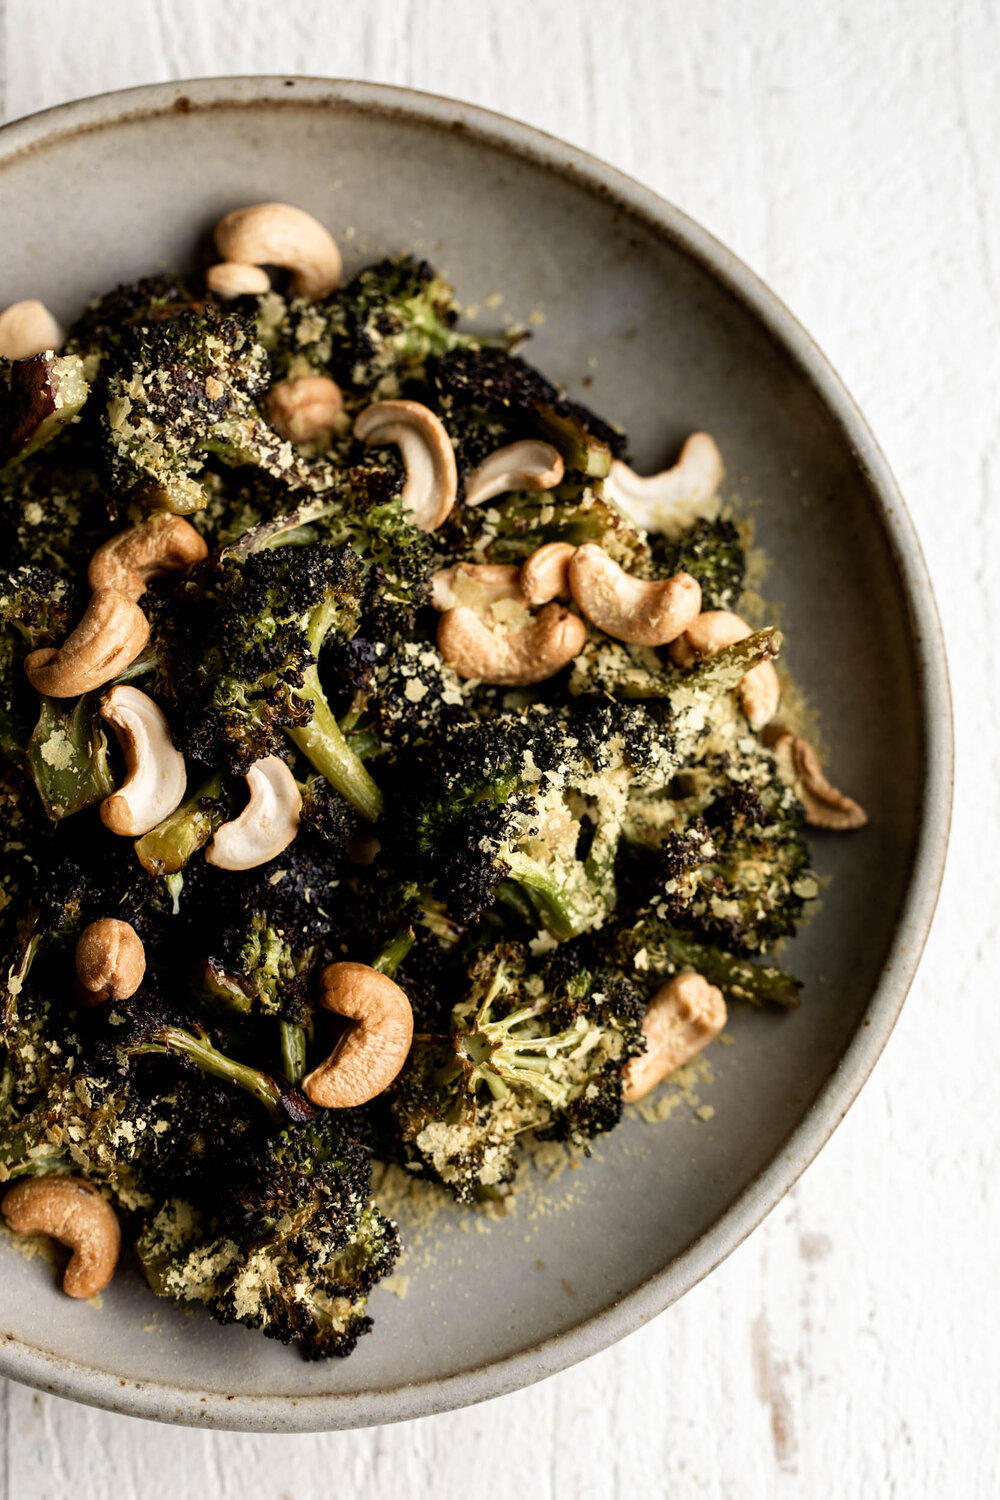 Chili Oil Roasted Broccoli with Cashews vegetable recipe